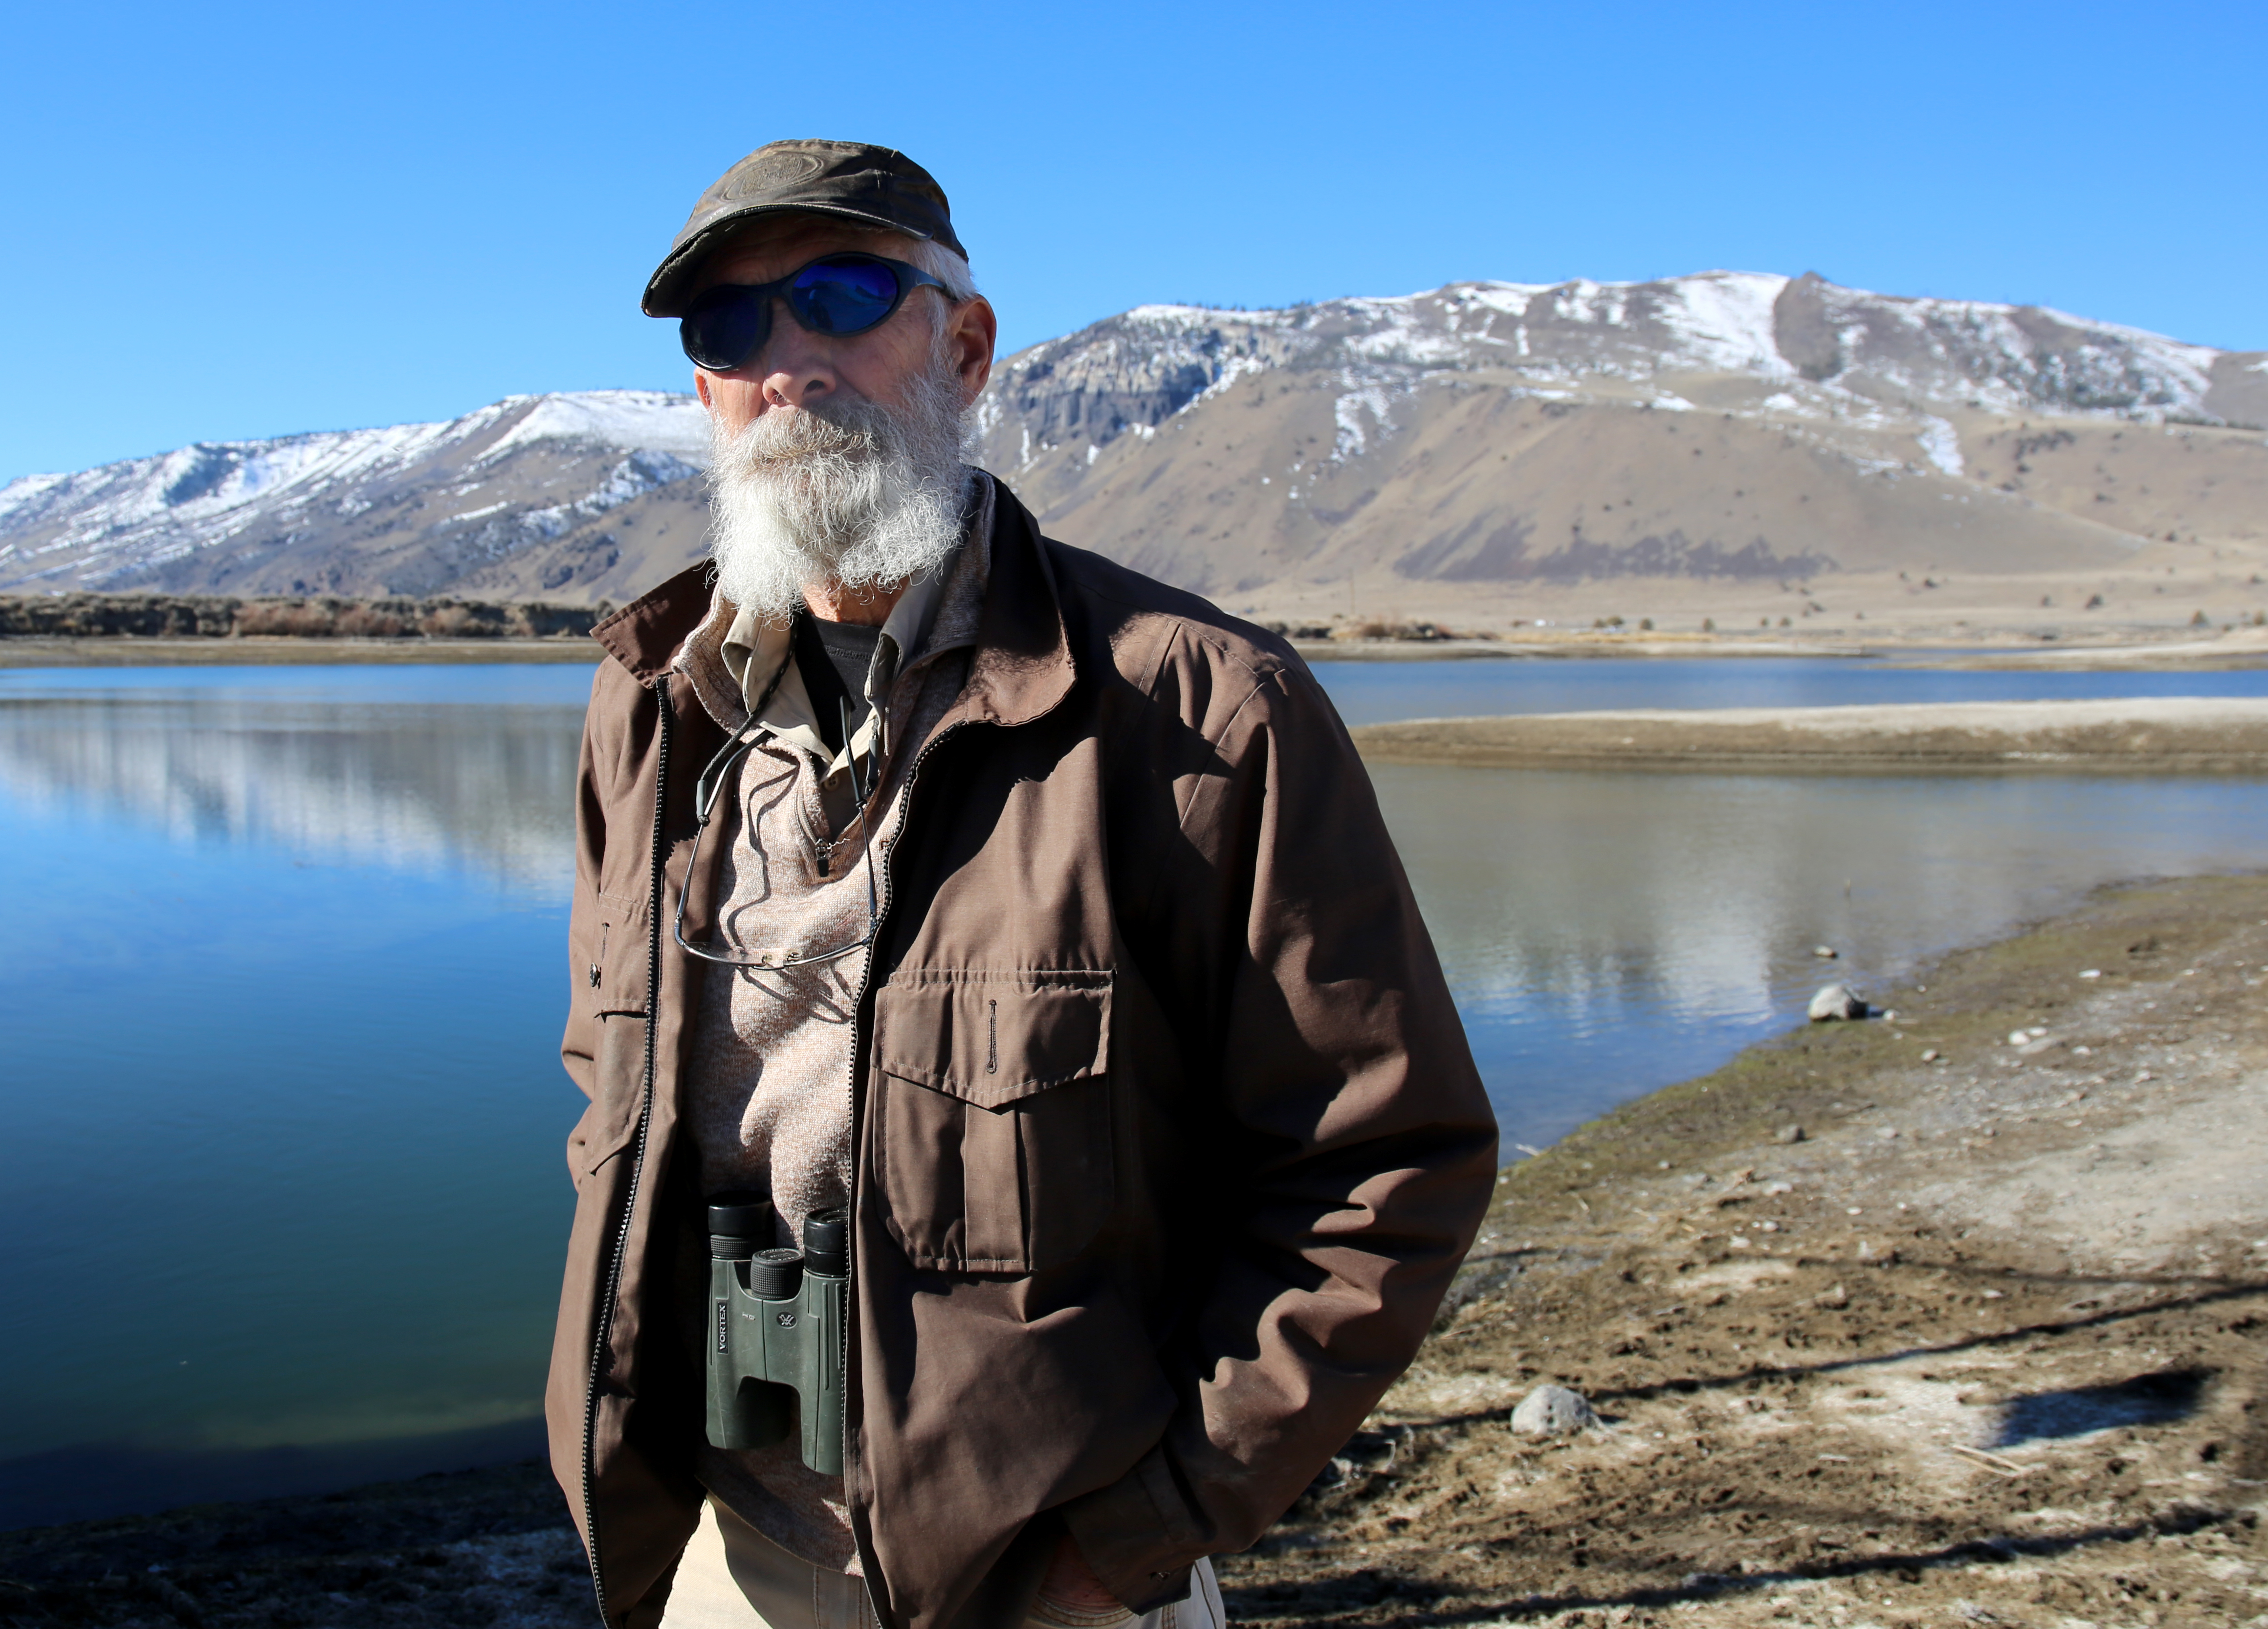 Retired state wildlife manager Marty St. Louis near the output of the Ana Springs in Southern Oregon's Lake County on Feb. 18, 2022.